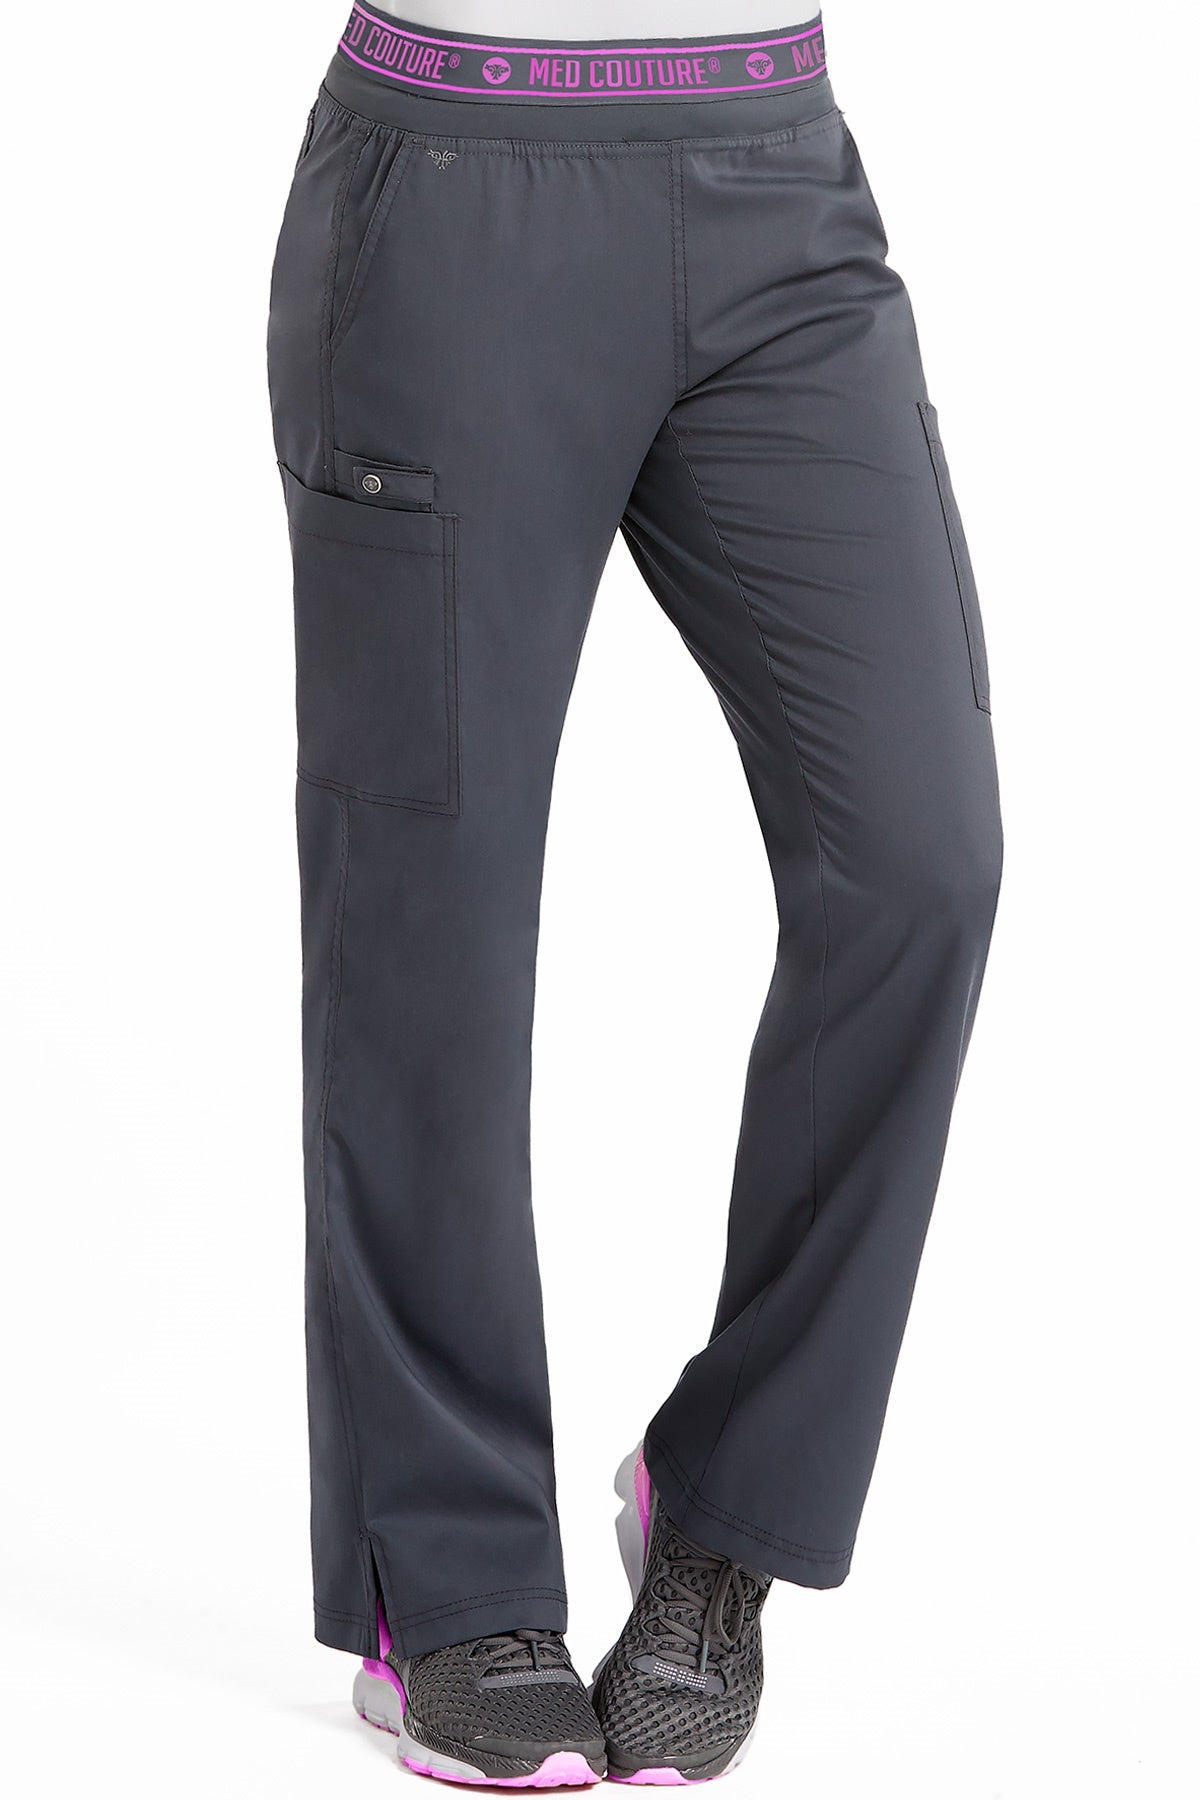 Med Couture Scrub Pants Touch Ally Yoga Pant in Pewter at Parker's Clothing and Shoes.